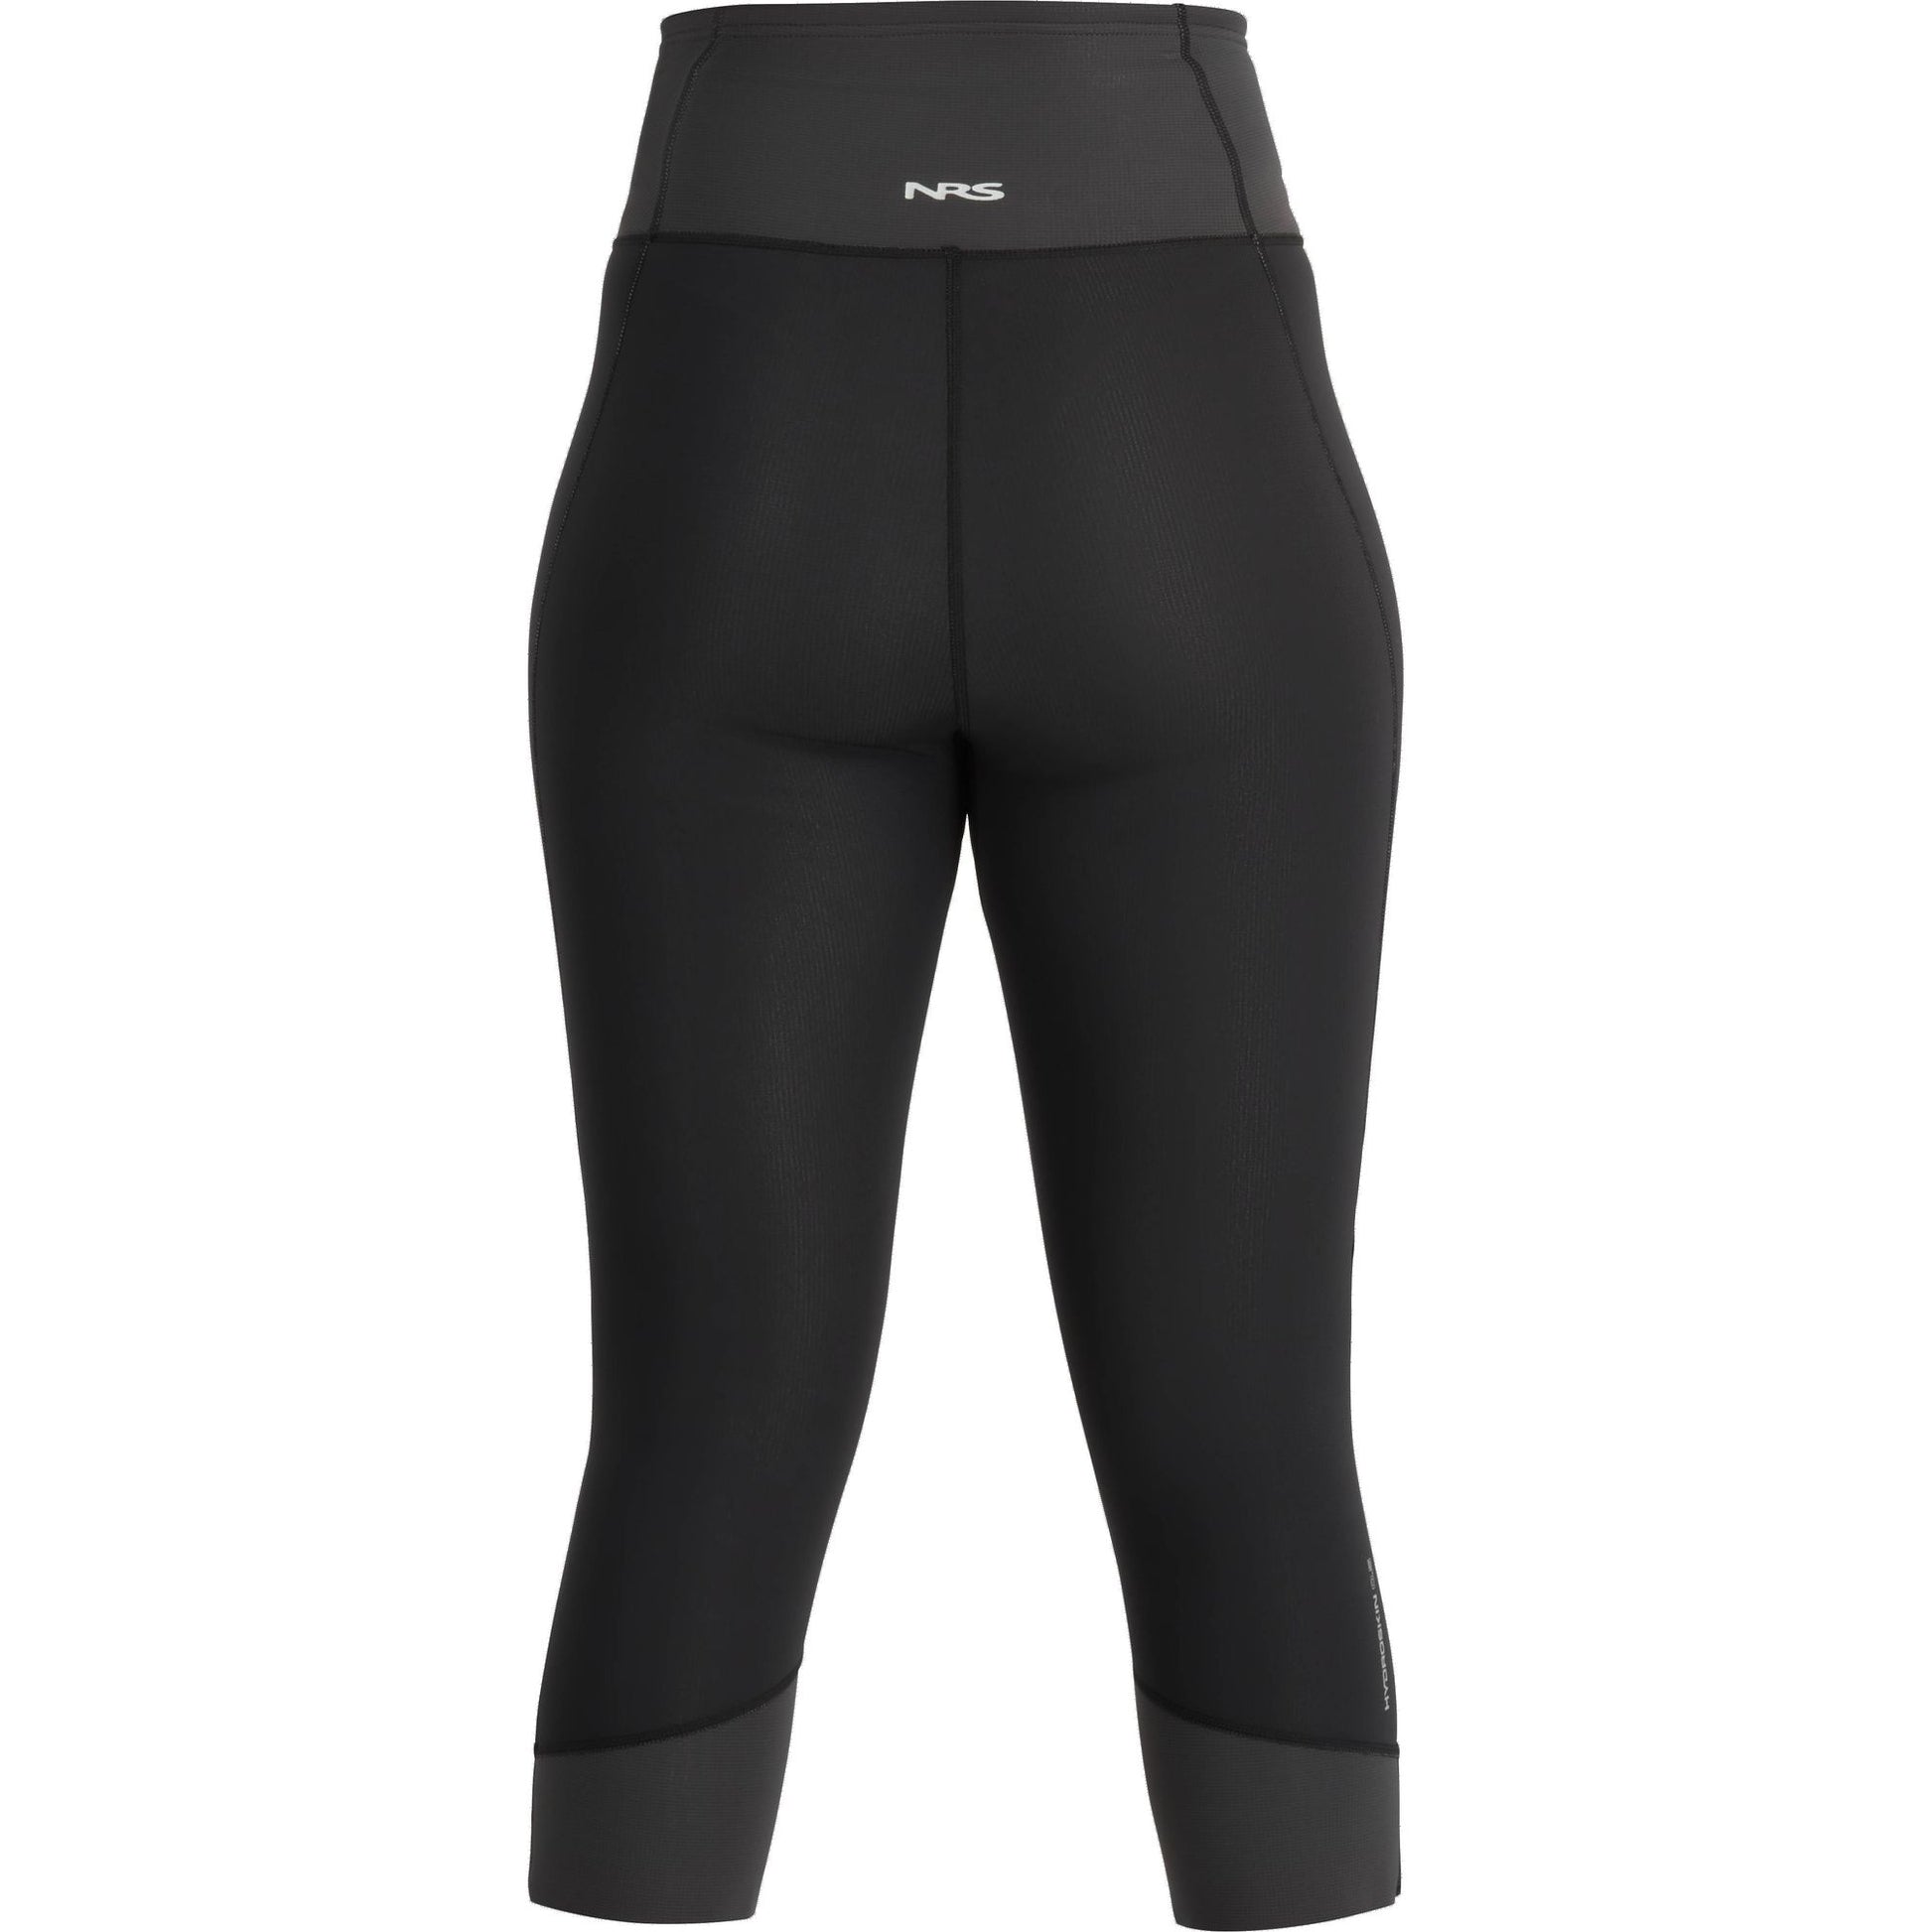 Black Hydroskin 0.5 Capri - Women's sports leggings with a reflective logo on the waistband, displayed on a plain white background by NRS.